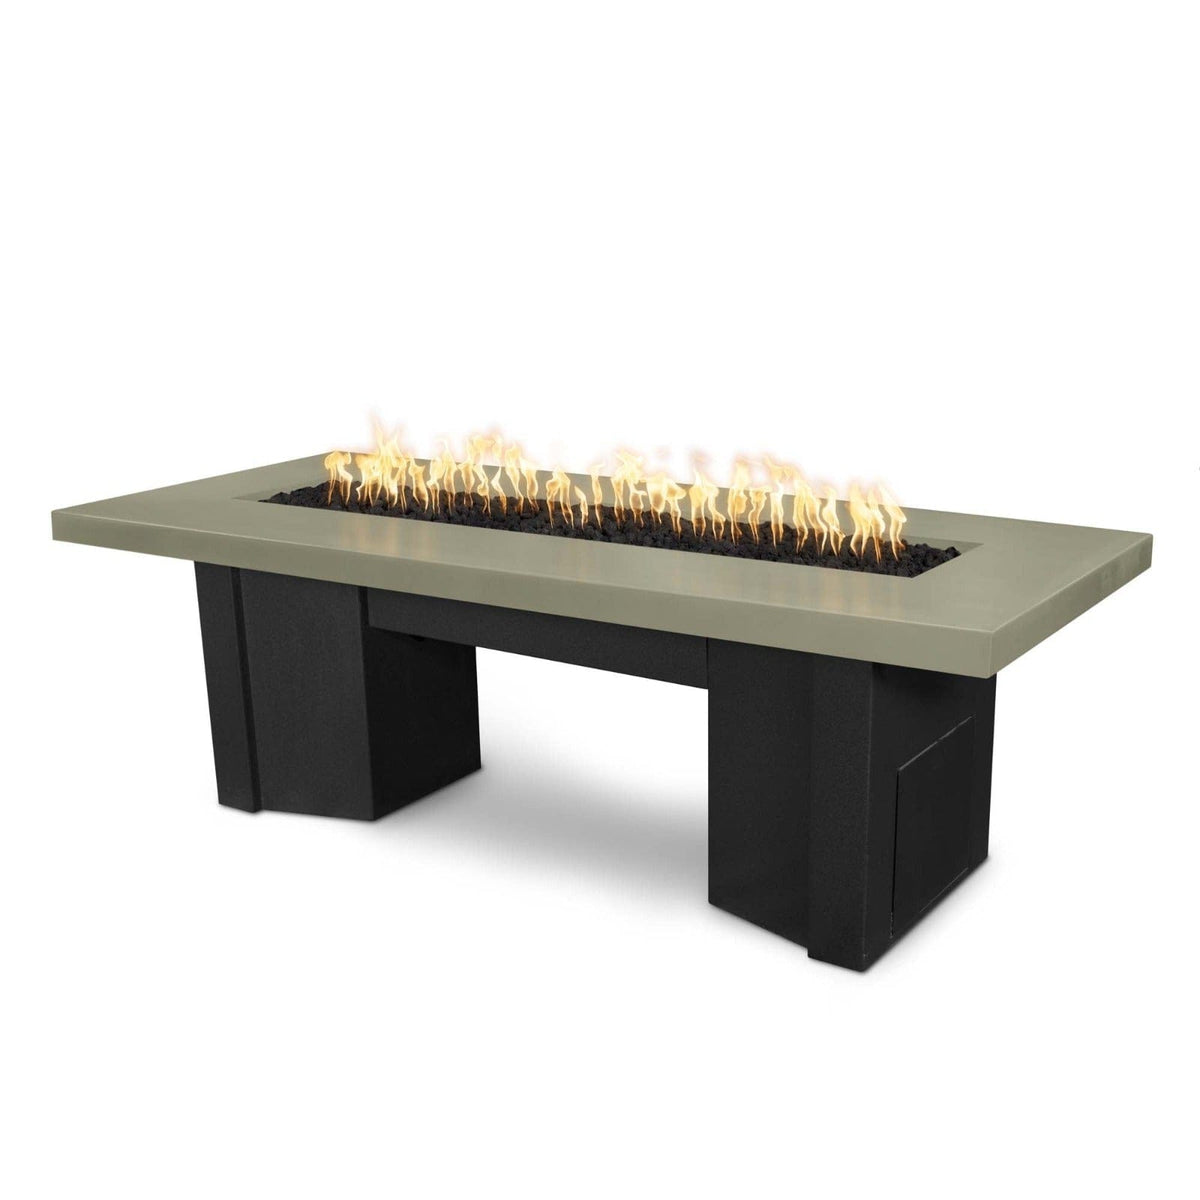 The Outdoor Plus Fire Features Ash (-ASH) / Black Powder Coated Steel (-BLK) The Outdoor Plus 60&quot; Alameda Fire Table Smooth Concrete in Liquid Propane - Flame Sense System with Push Button Spark Igniter / OPT-ALMGFRC60FSEN-LP